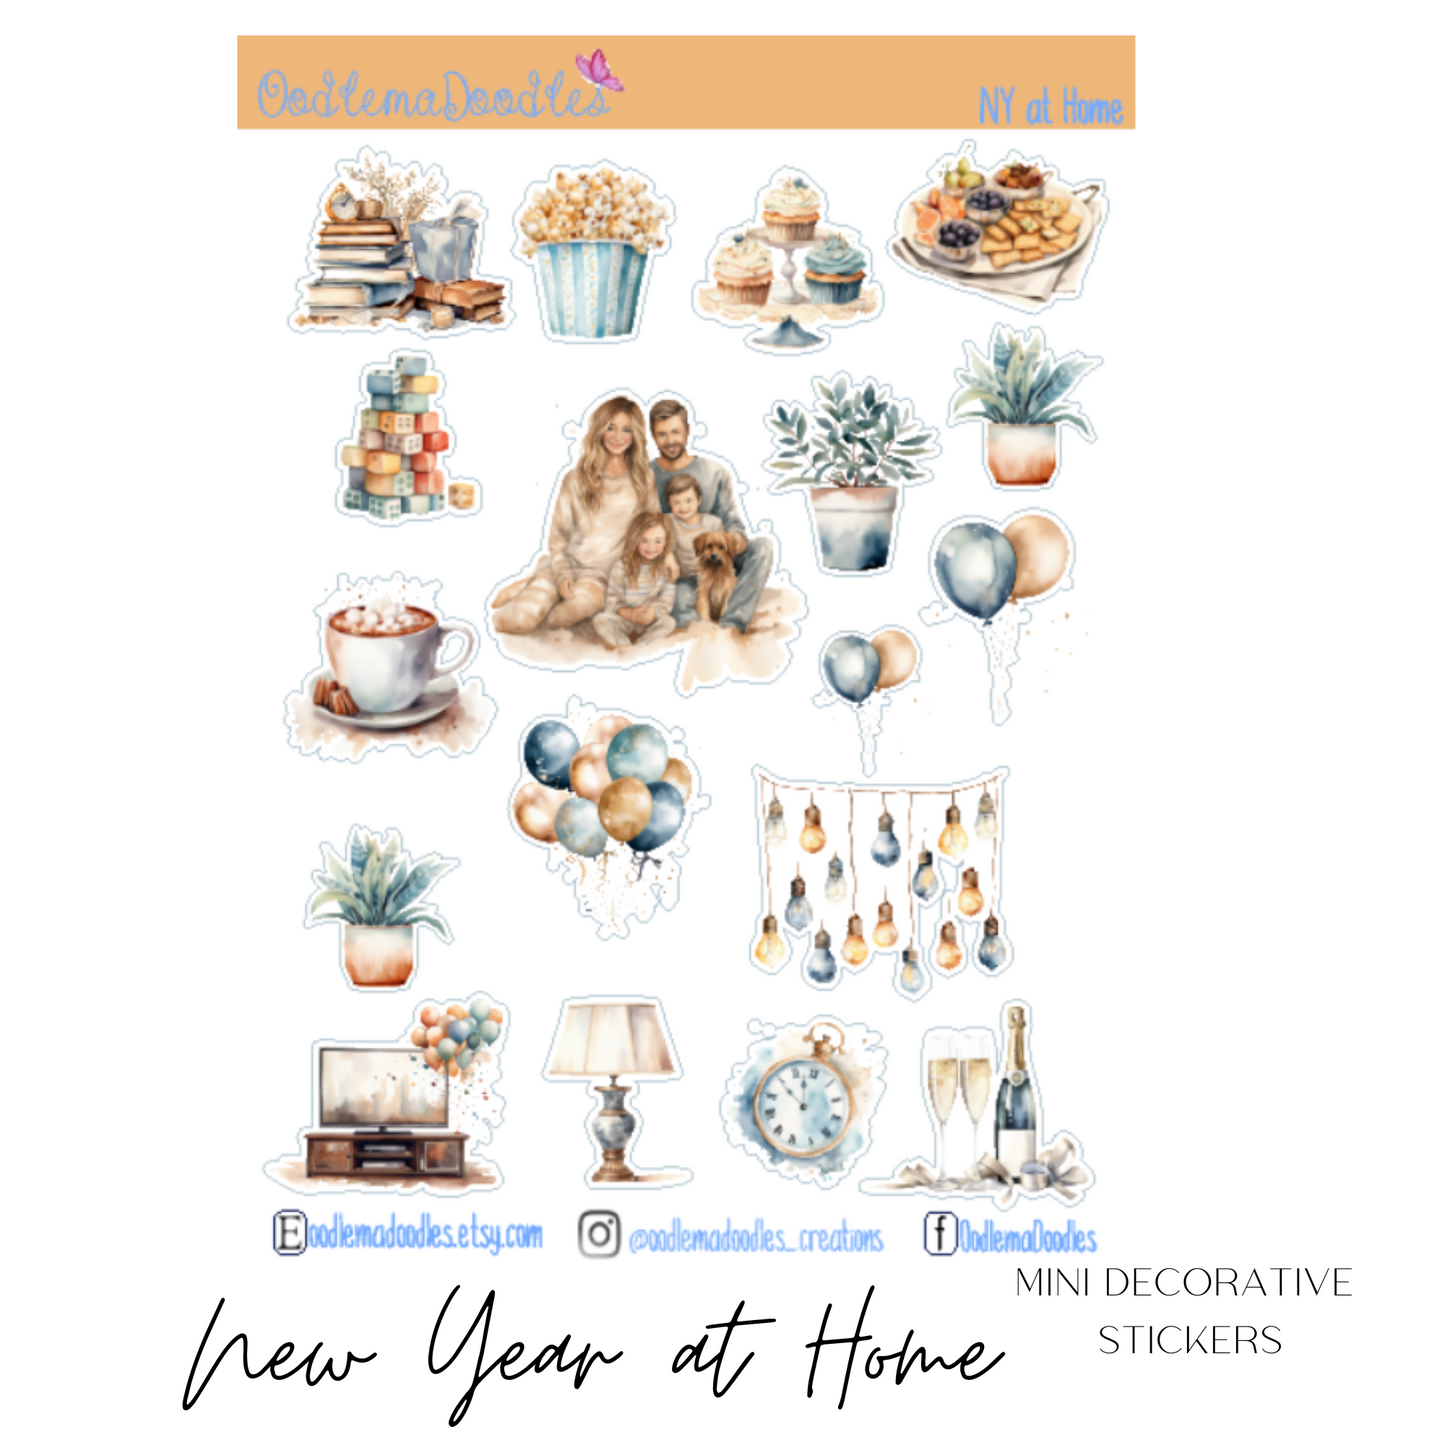 New Year at Home Mini Decorative Stickers